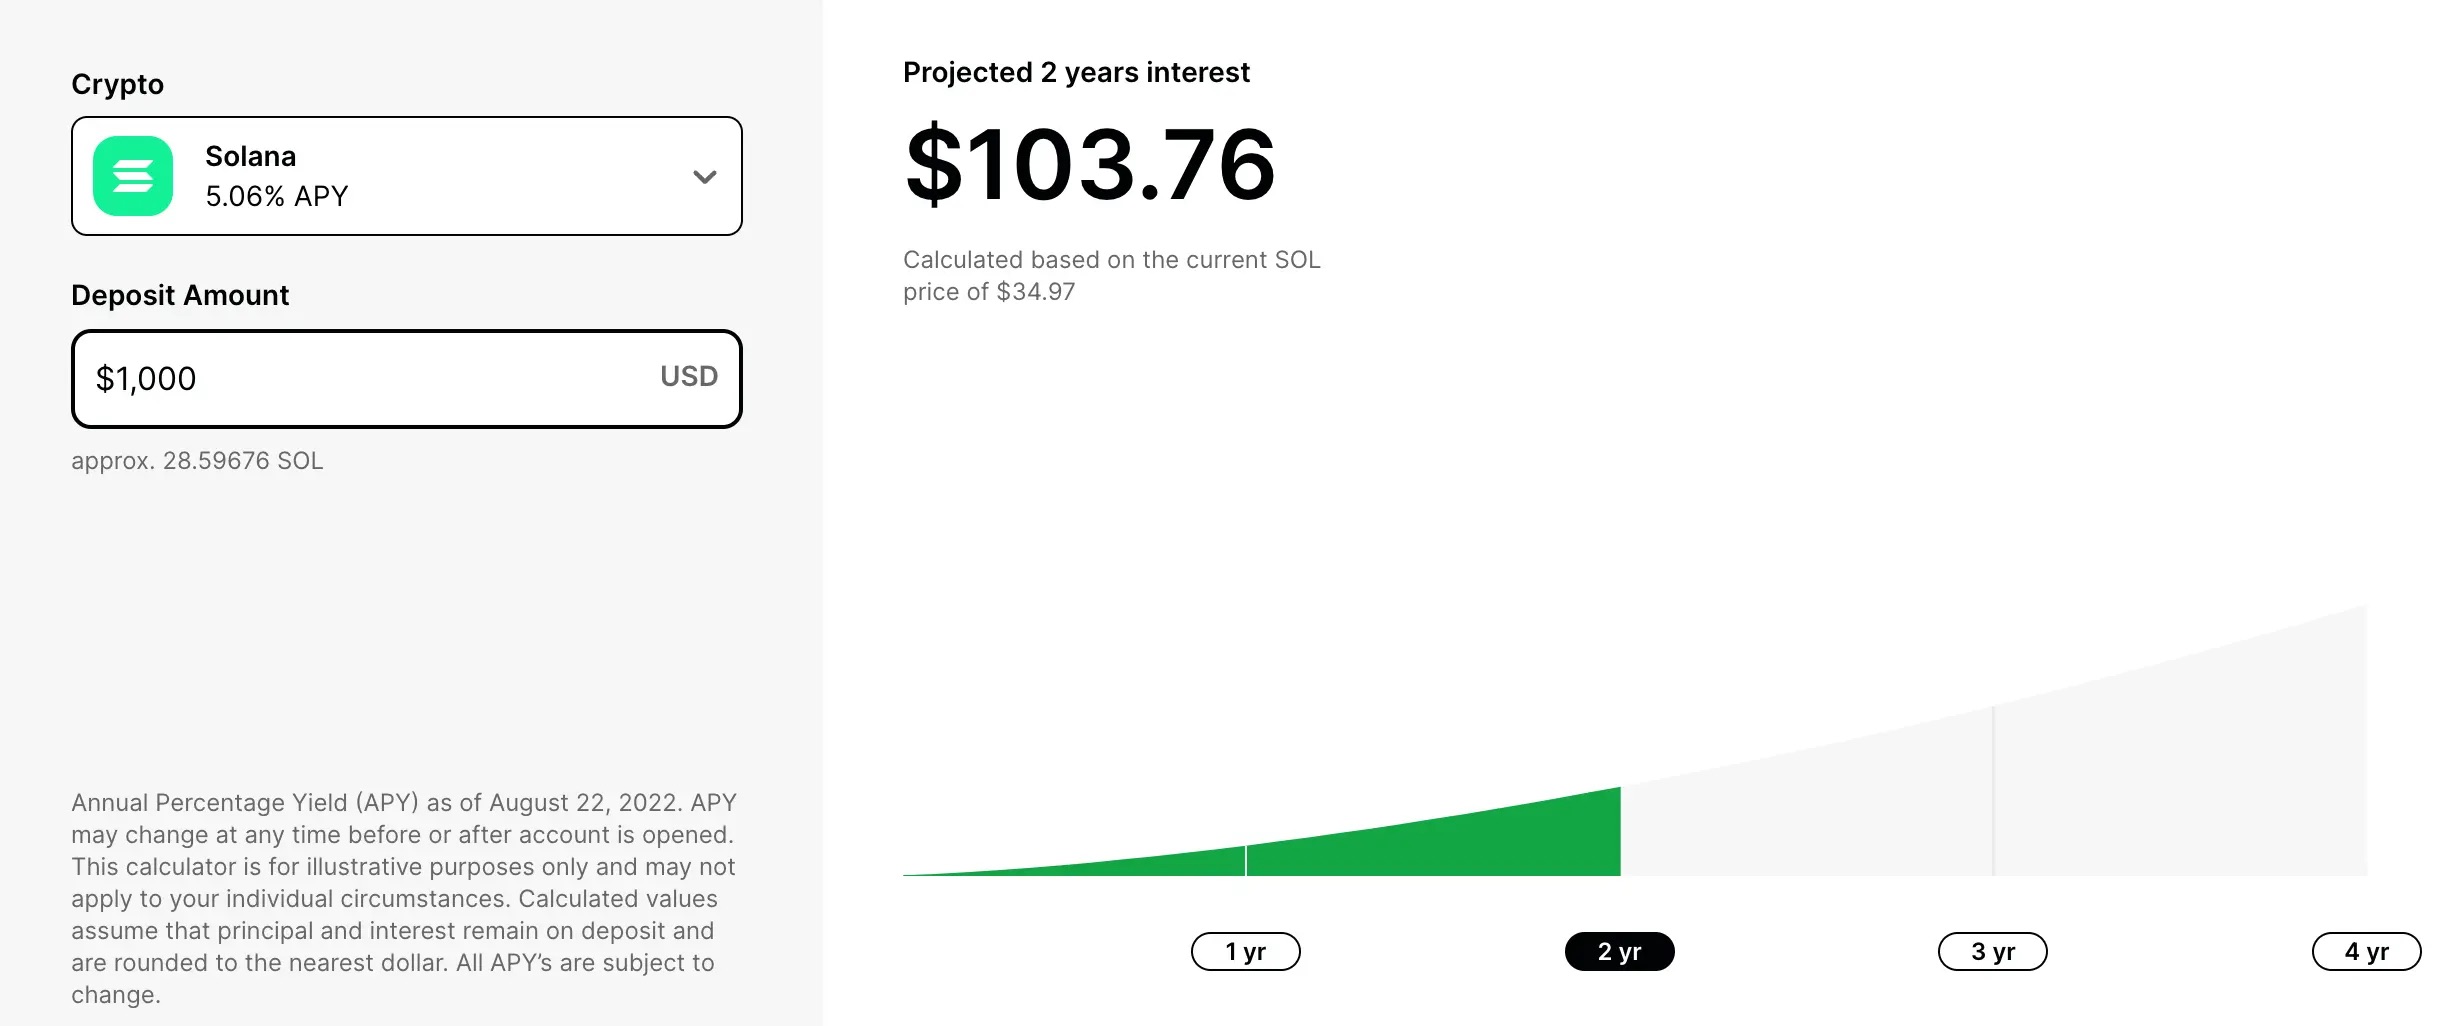 A screenshot of Gemini's lending calculator for Solana and projected interest.